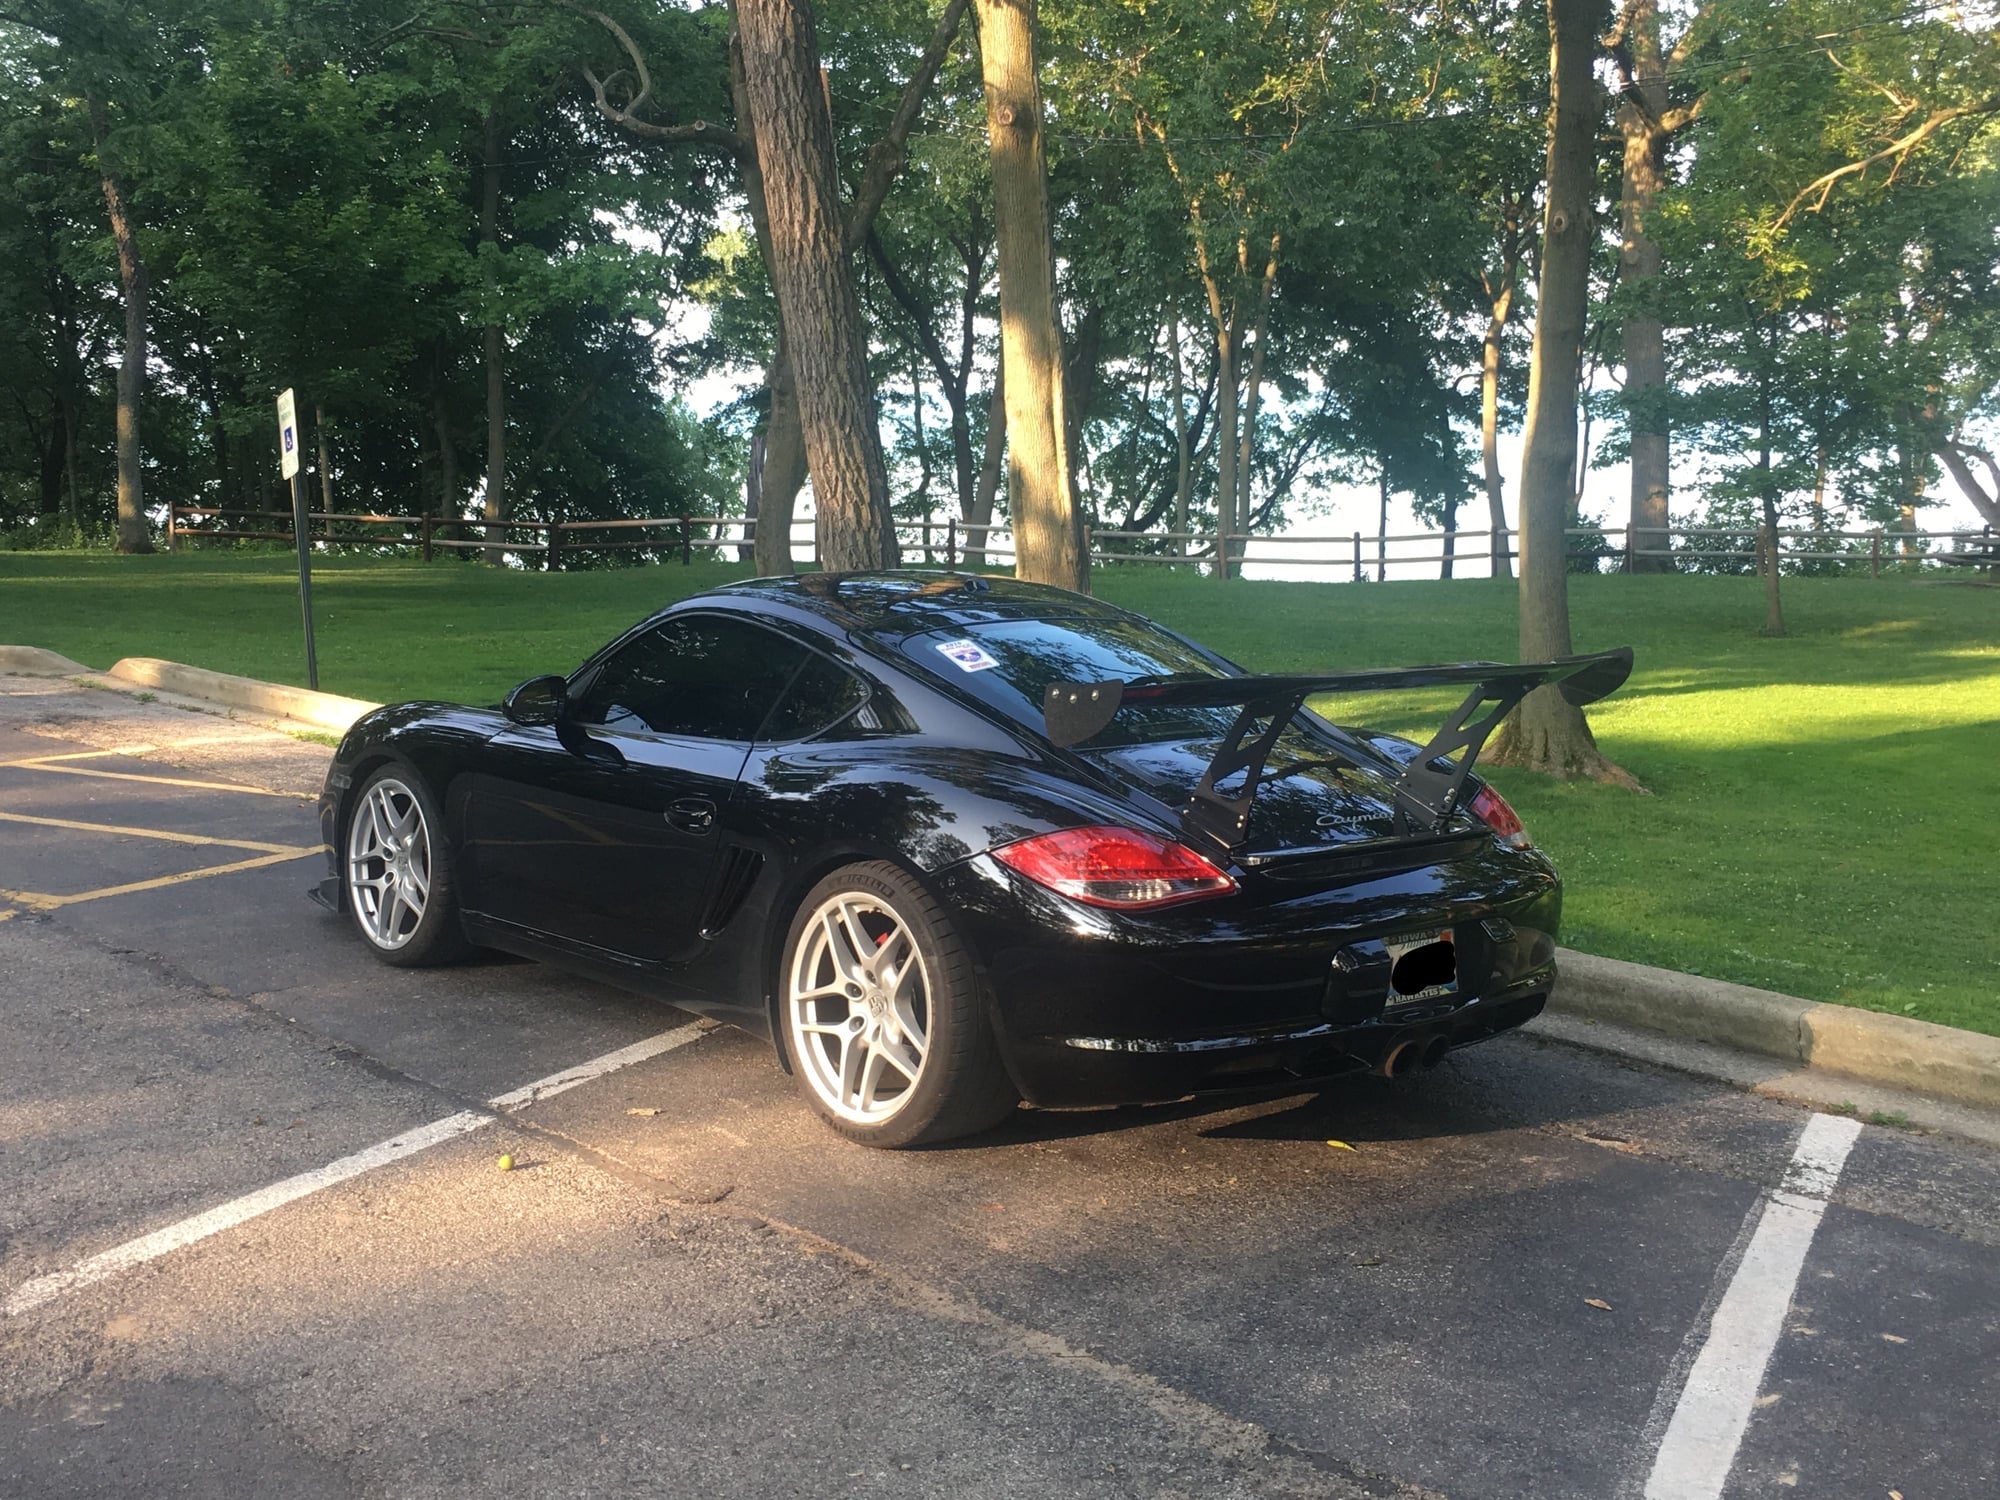 2009 Porsche Cayman - 2009 Cayman S PDK with Sport Chrono and Track Focused Upgrades - Used - VIN WP0AB29849U780173 - 39,800 Miles - 6 cyl - 2WD - Automatic - Coupe - Black - Winnetka, IL 60093, United States